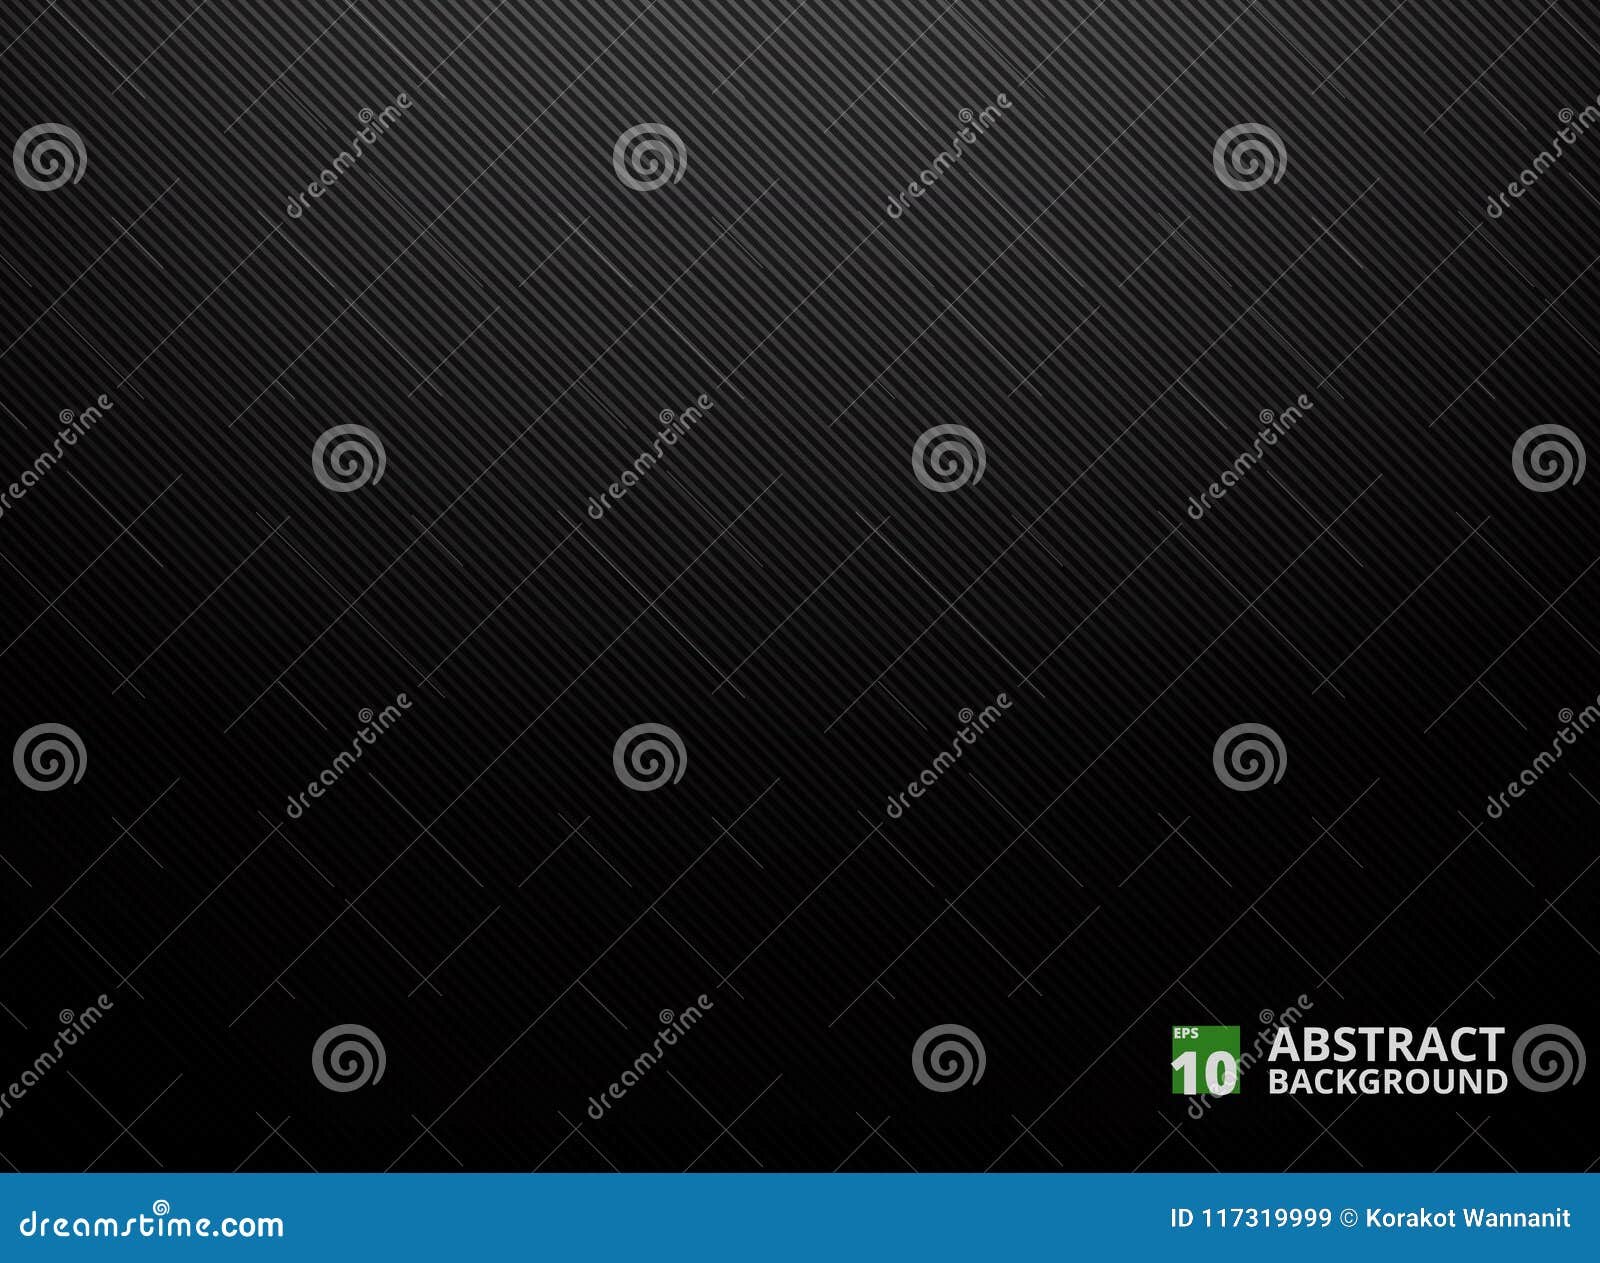 abstract of dark black metallic background with slanting lines of soft striped pattern.